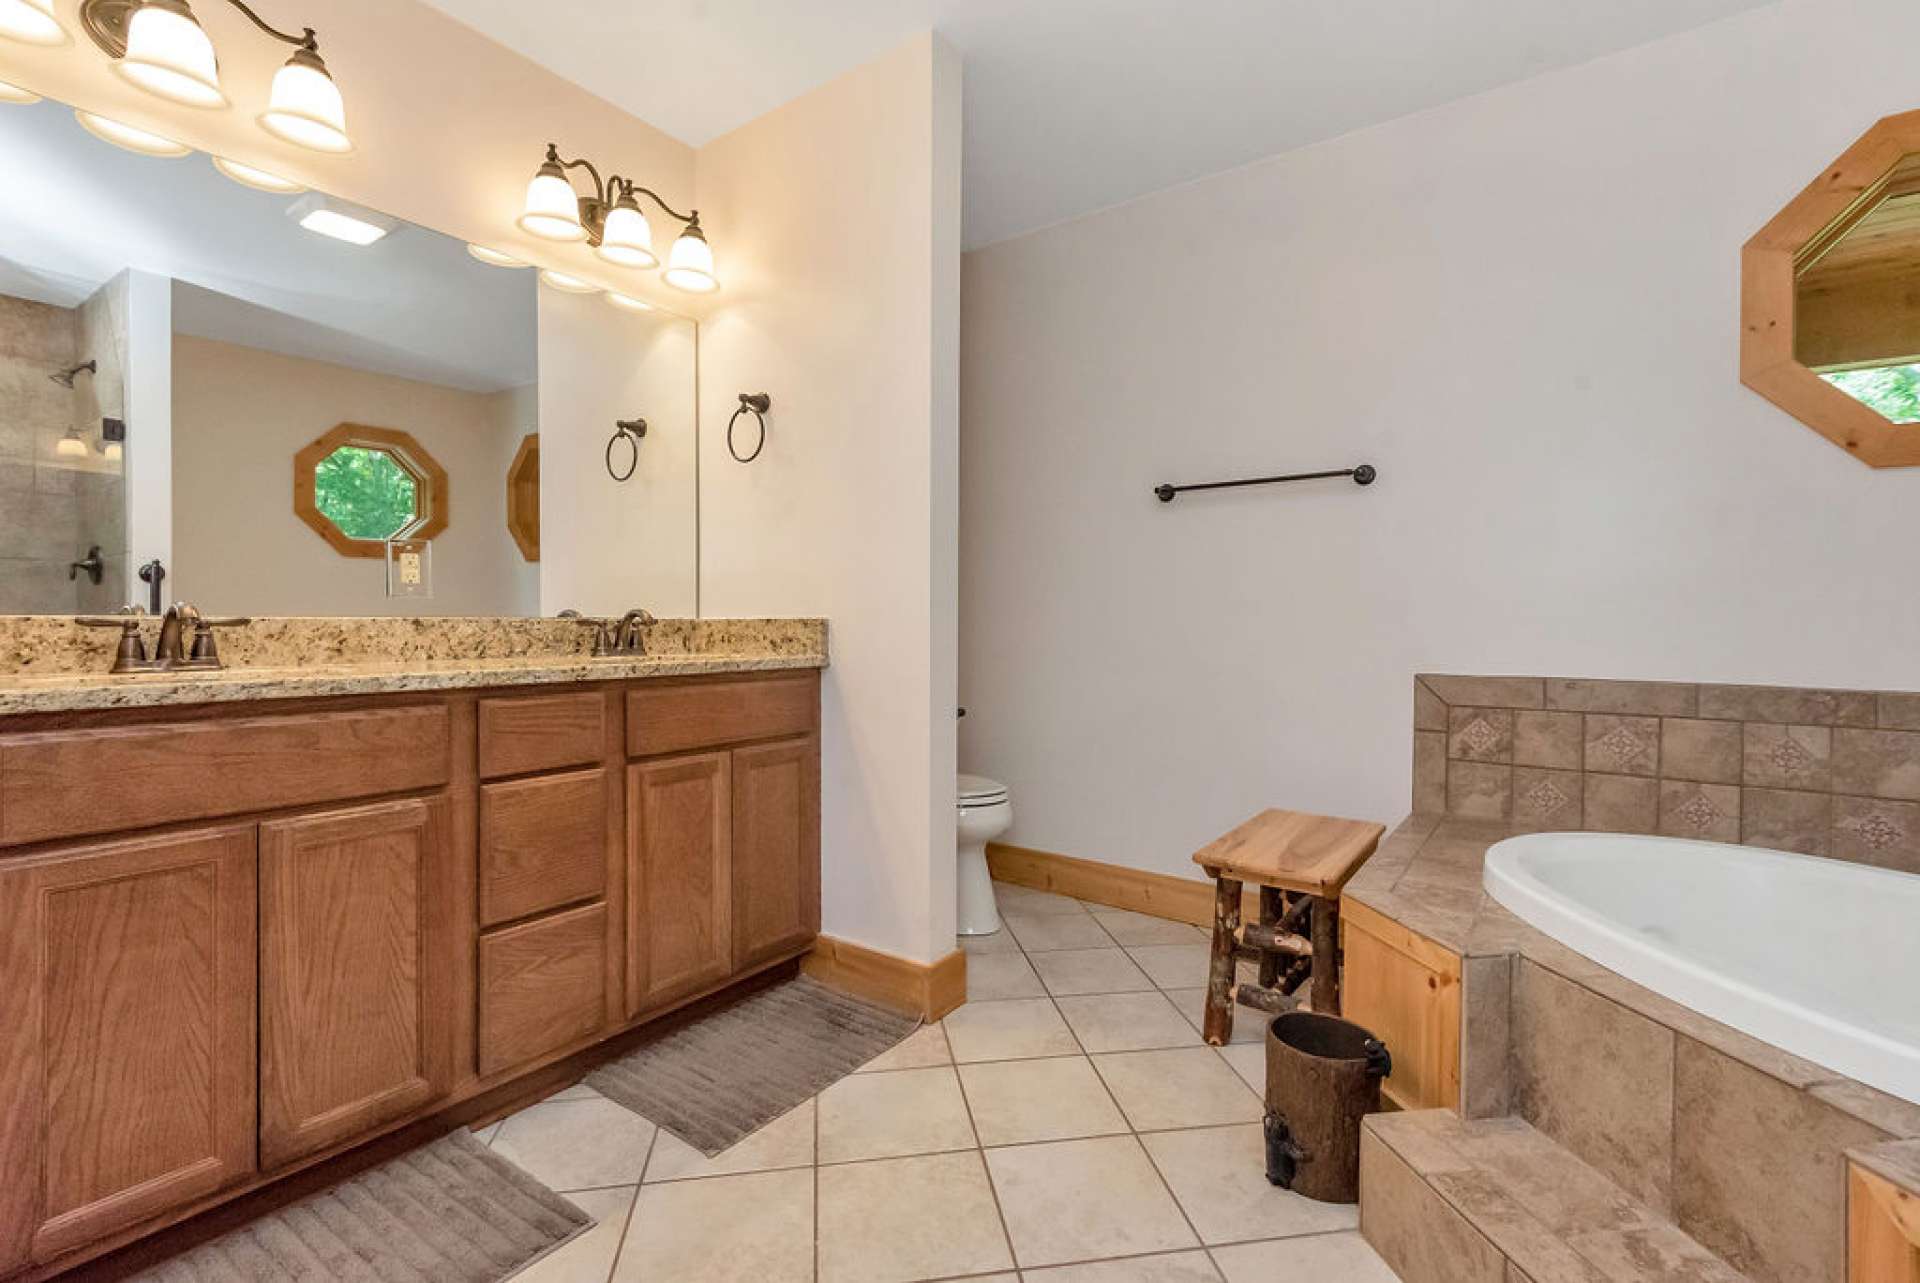 Enjoy double sinks, jetted tub, and easy step-in tile shower.